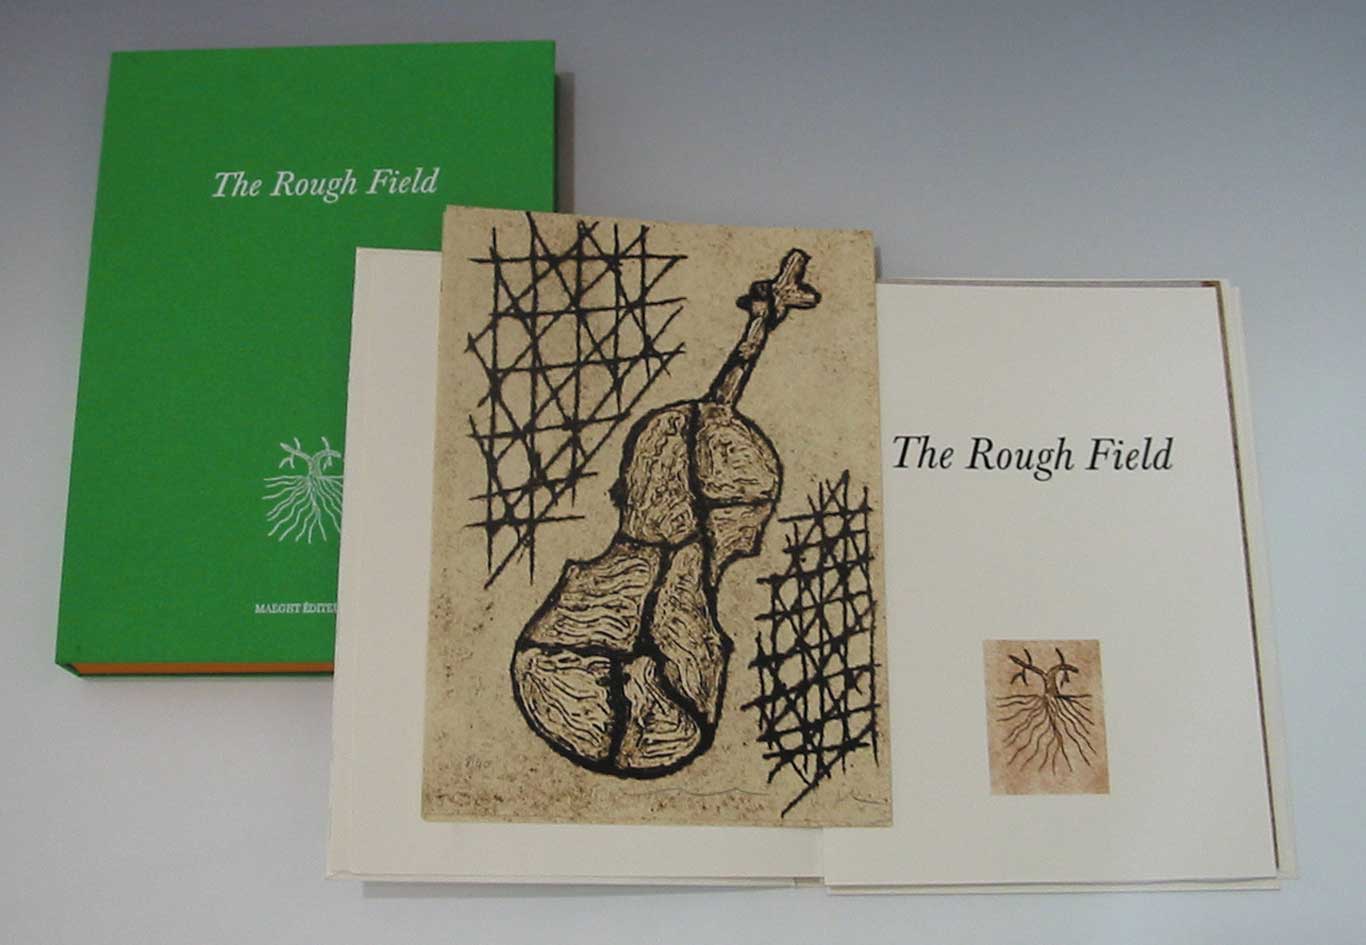 JOHN MONTAGUE: THE ROUGH FIELD, illustrated by Marco del Re by Marco del Re (b.1950) at Whyte's Auctions